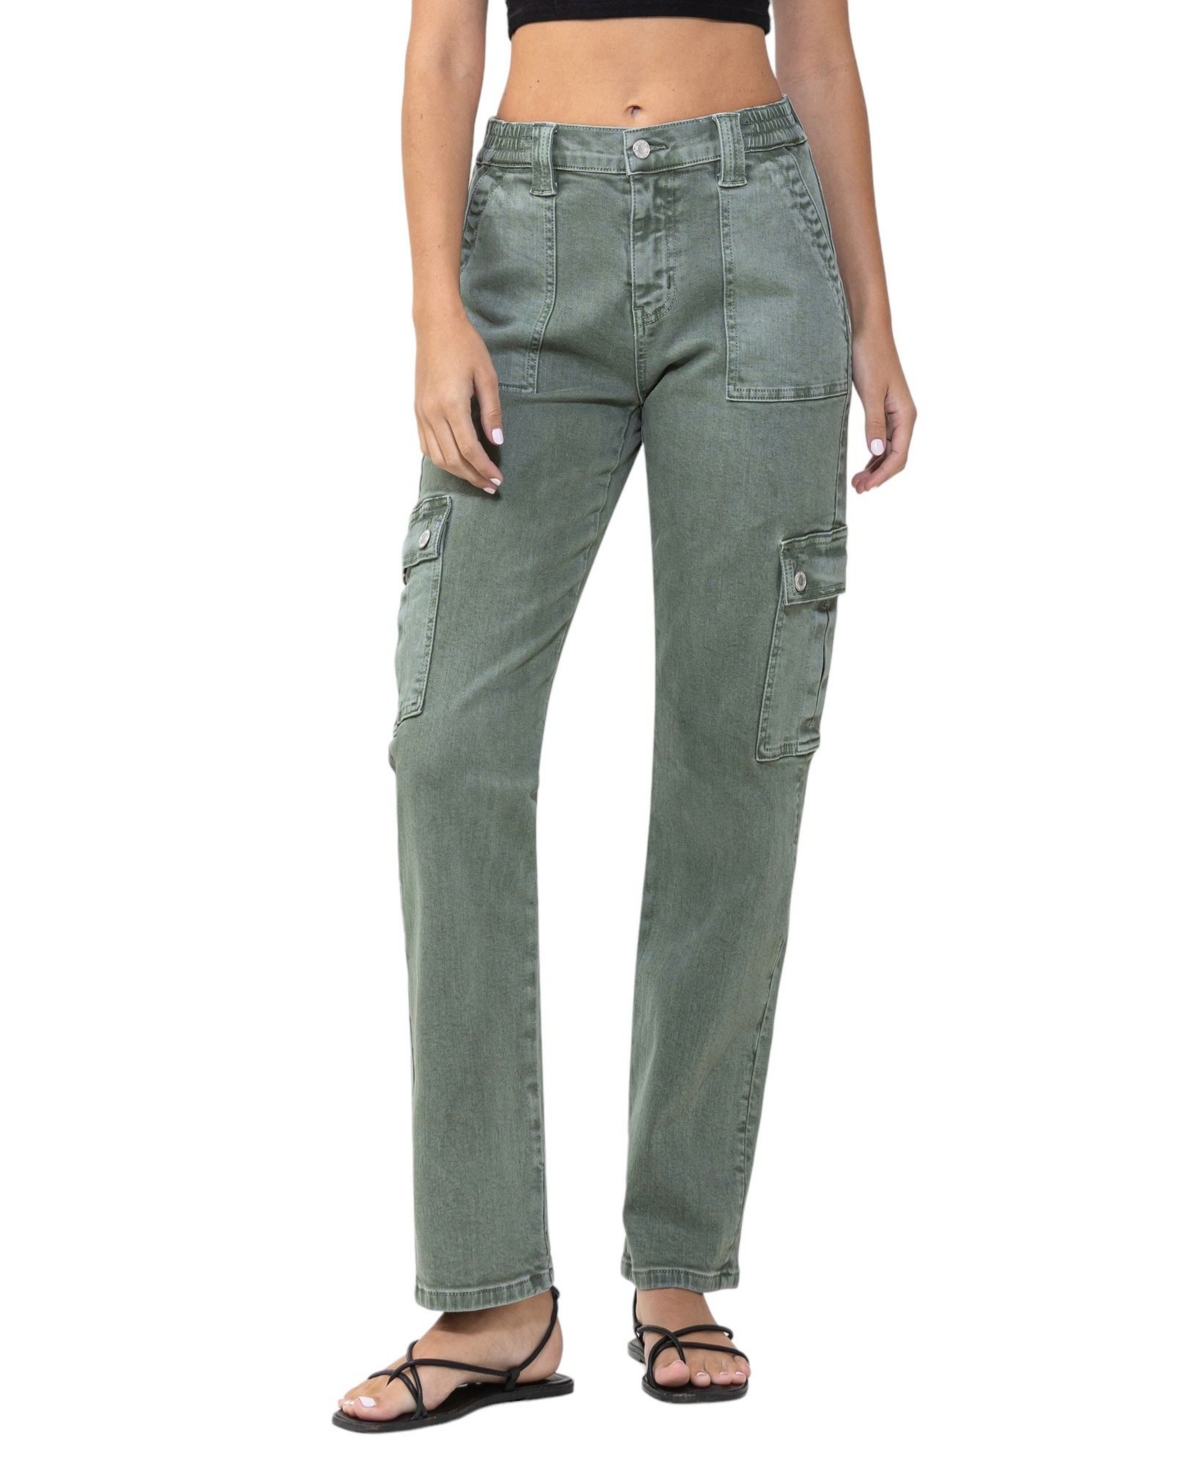 Women's High Rise Cargo Straight Jeans - Army green